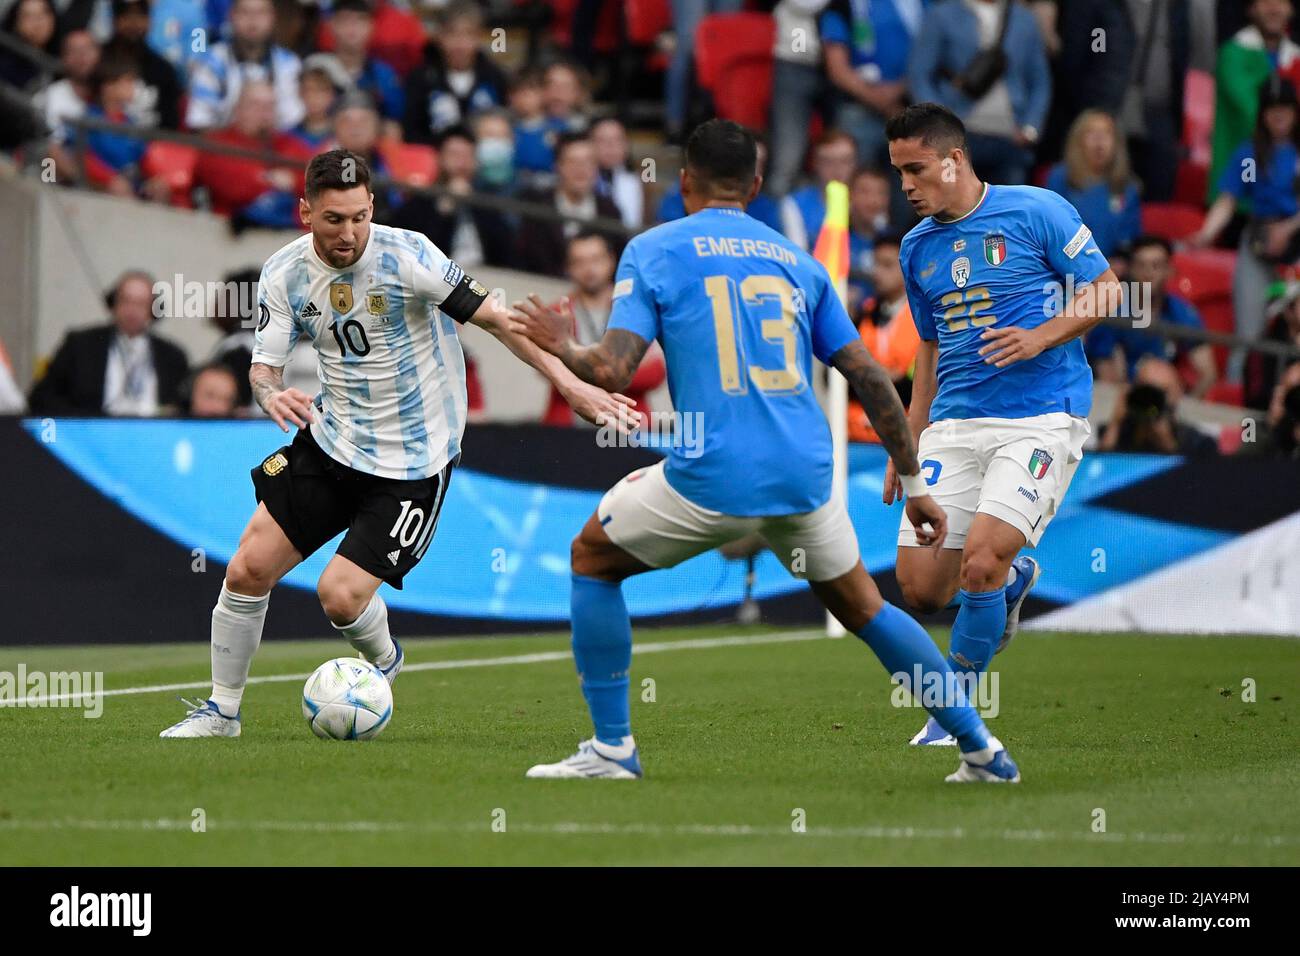 London, France. 01st June, 2022. Lionel Messi of Argentina and Emerson Palmieri Dos Santos of Italy during the Finalissima trophy 2022 football match between Italy and Argentina at Wembley stadium in London, England, June 1st, 2022. Photo Andrea Staccioli/Insidefoto Credit: insidefoto srl/Alamy Live News Stock Photo